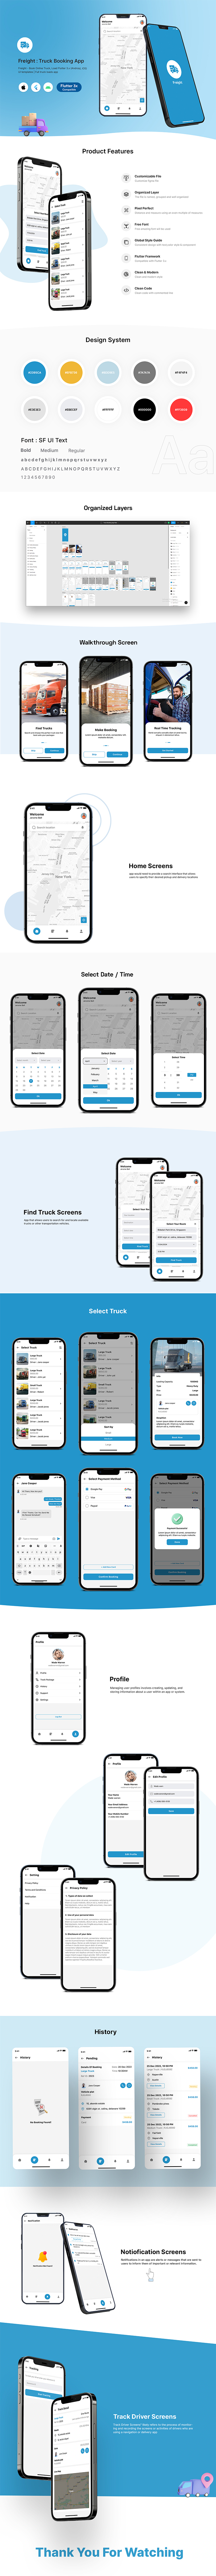 Freight - Book Online Truck, Load Flutter 3.x (Android, iOS) UI templates | Full truck loads app - 5